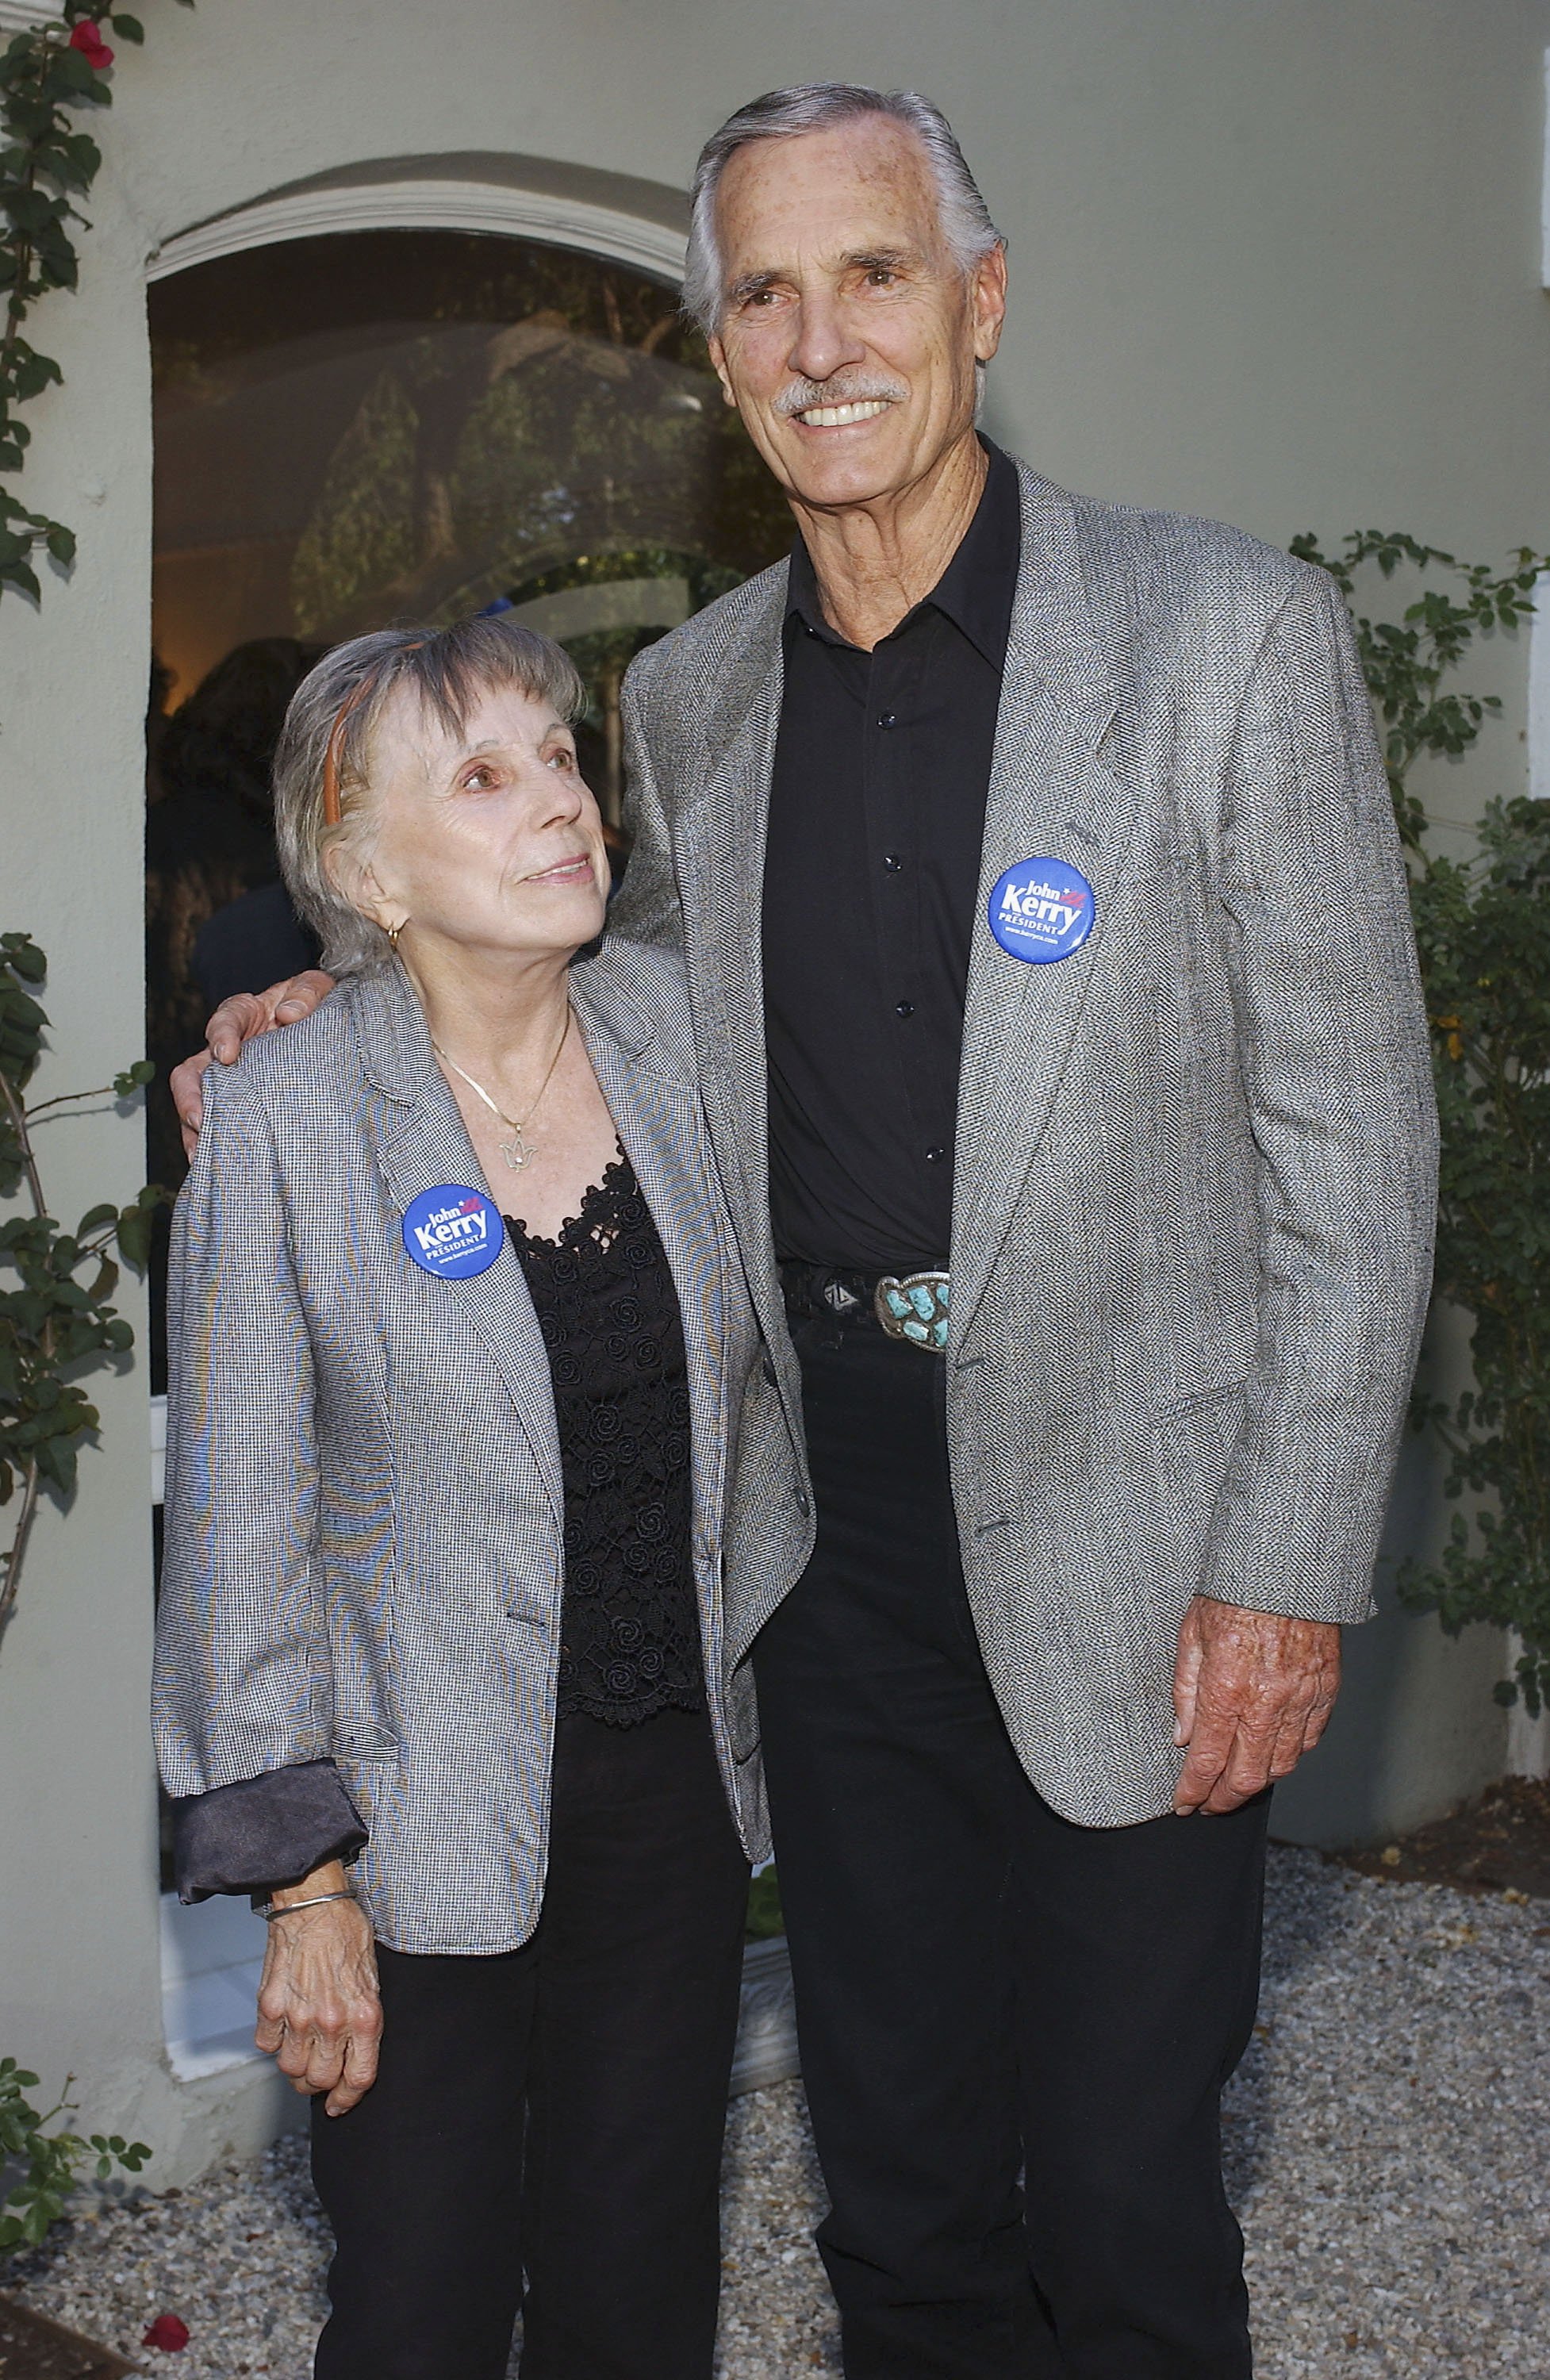 Dennis Weaver and Gerry Stowell arrive at the "Lift Ev'ry Vote" Hollywood fundraiser at the home of Michael Keegan on May 22, 2004 in Los Angeles, California. / Source: Getty Images